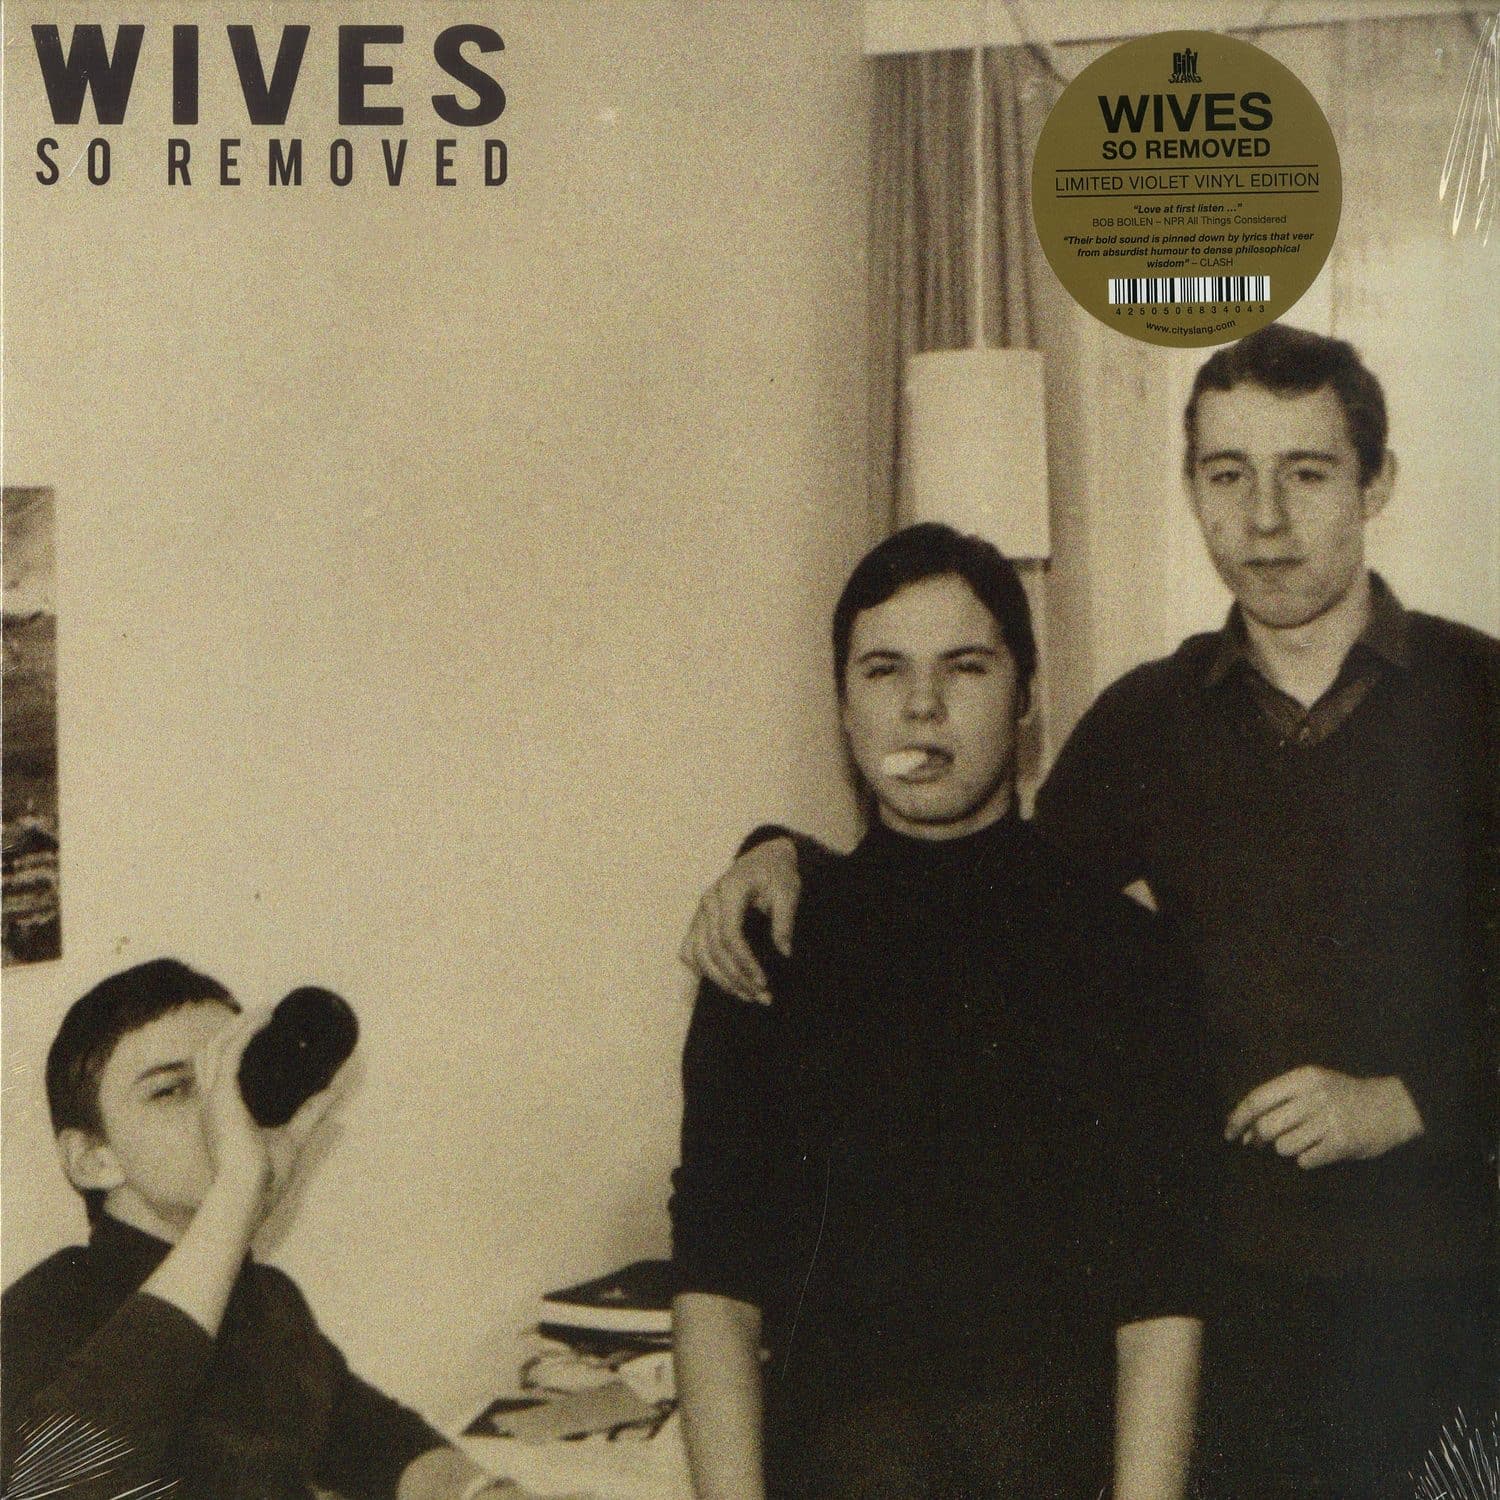 Wives - SO REMOVED 